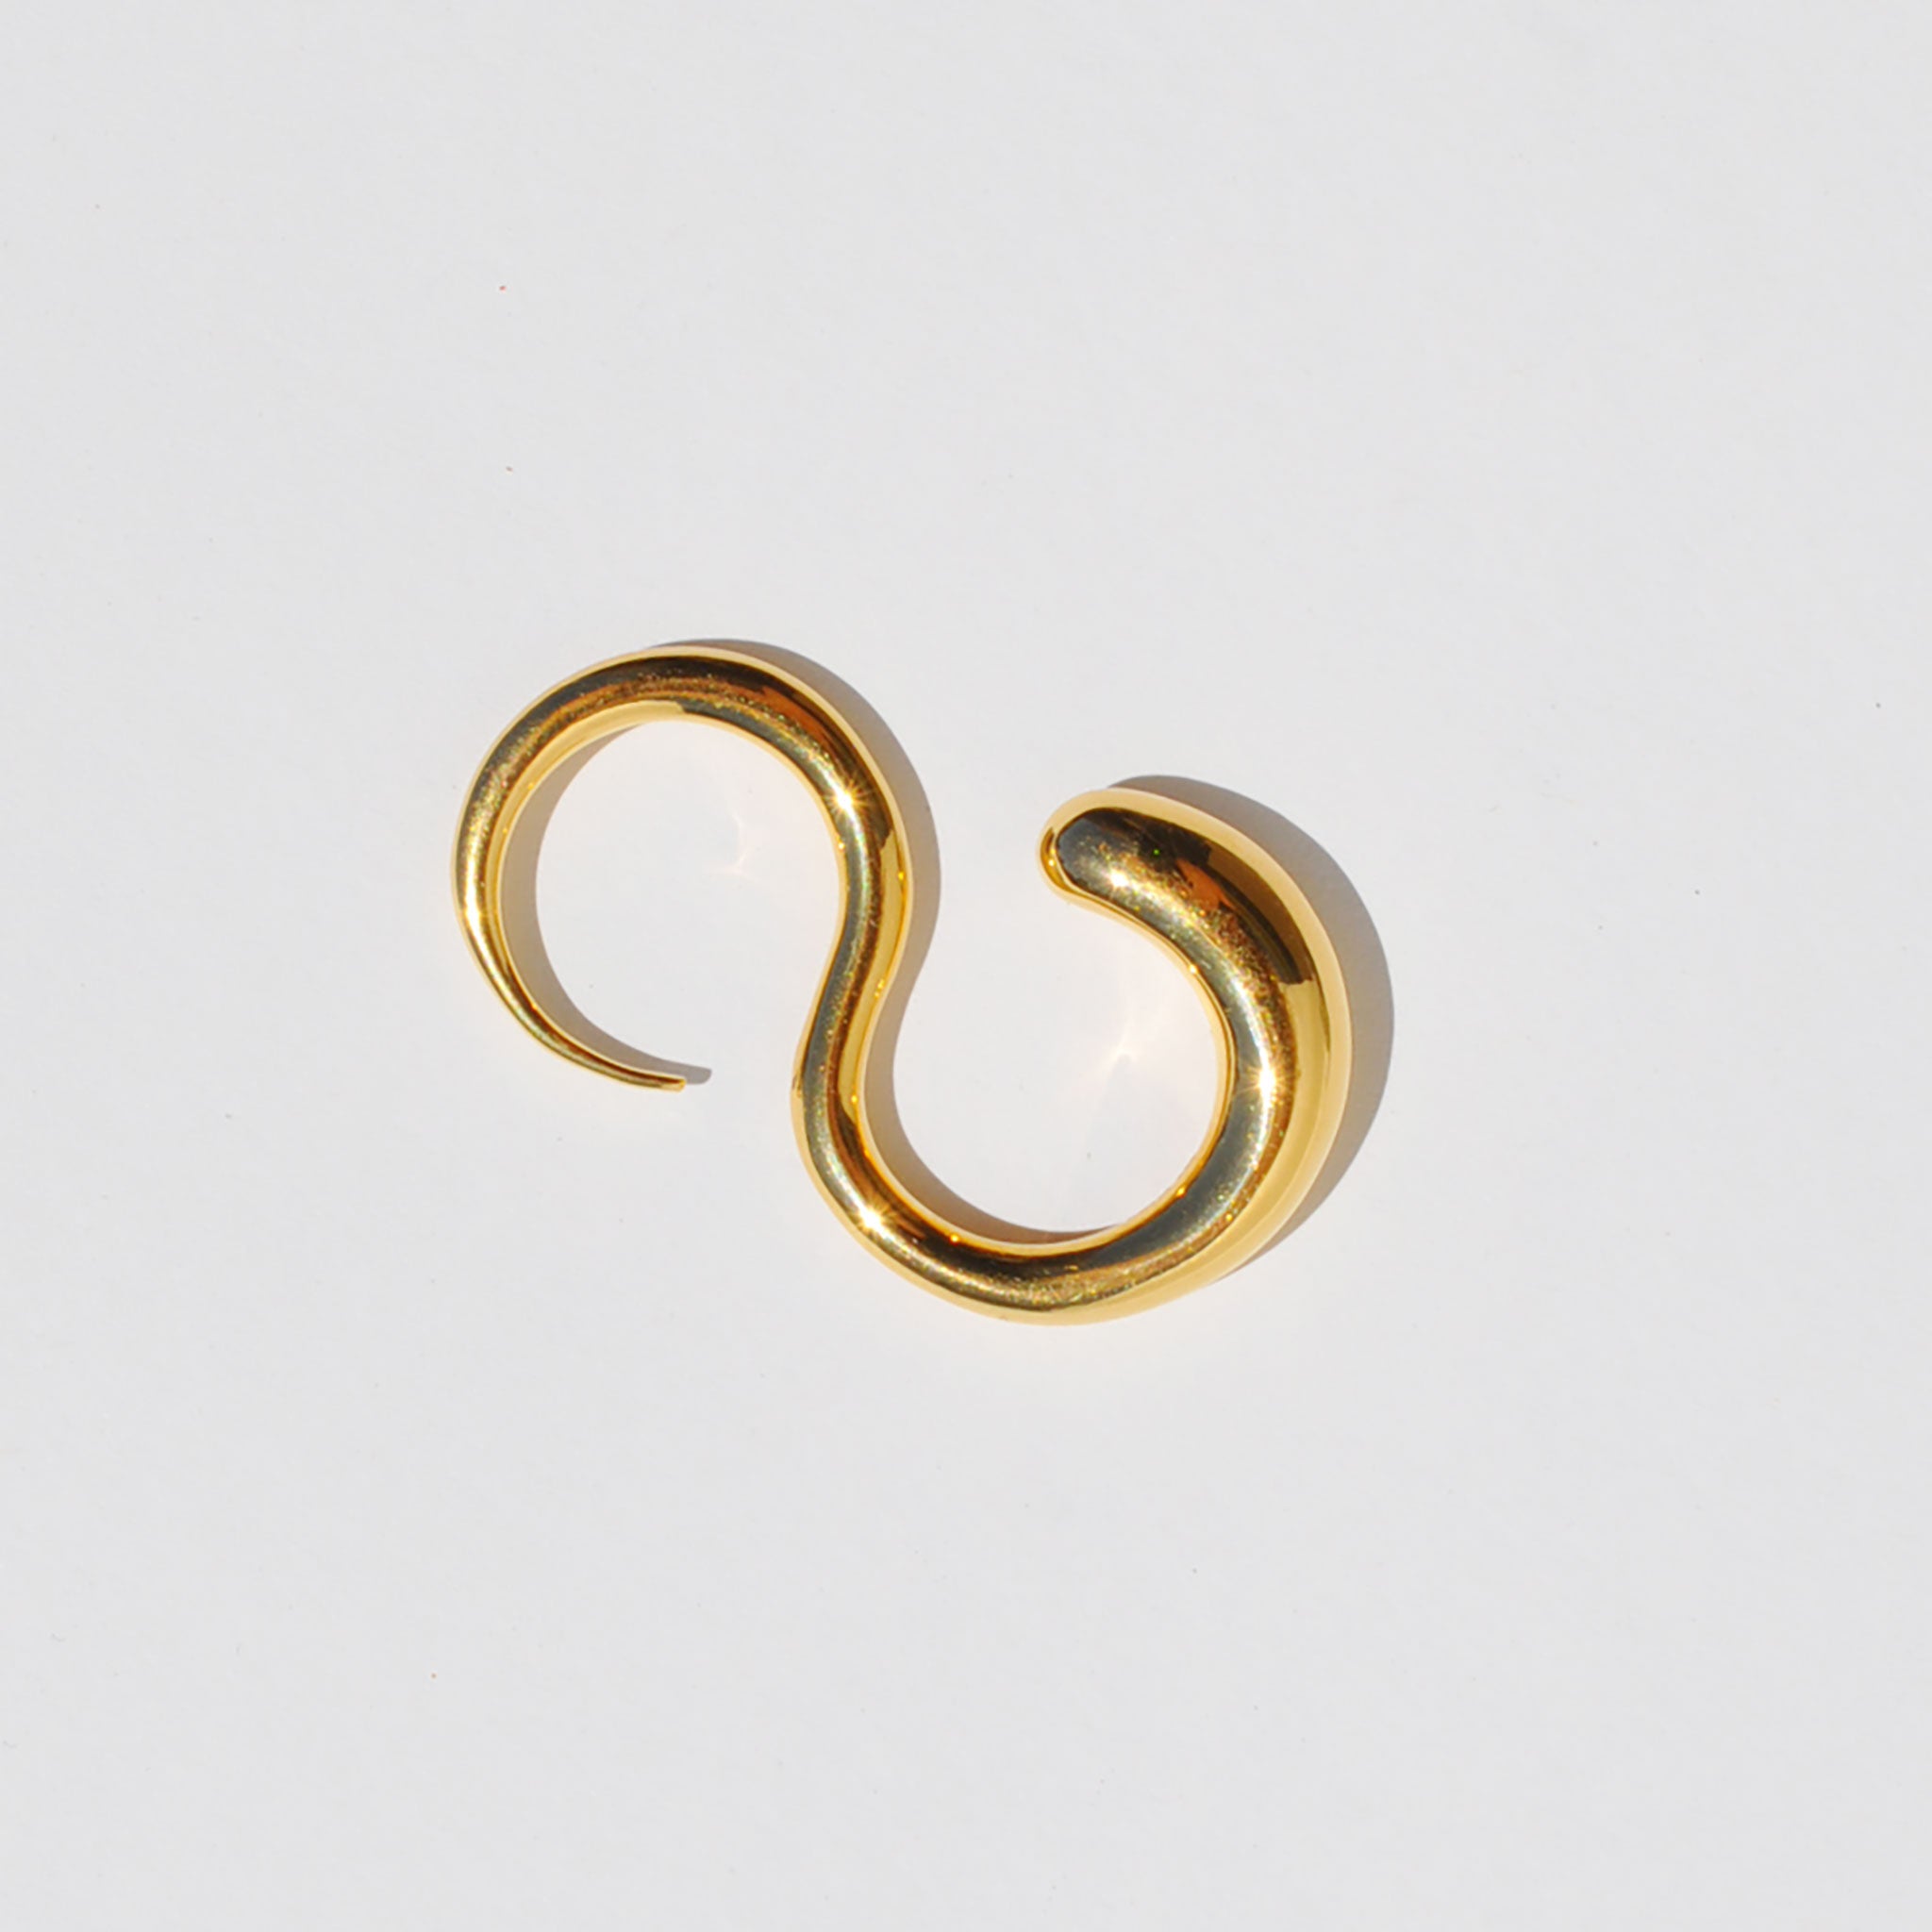 Two-finger gold ring in the shape of a coiled snake.